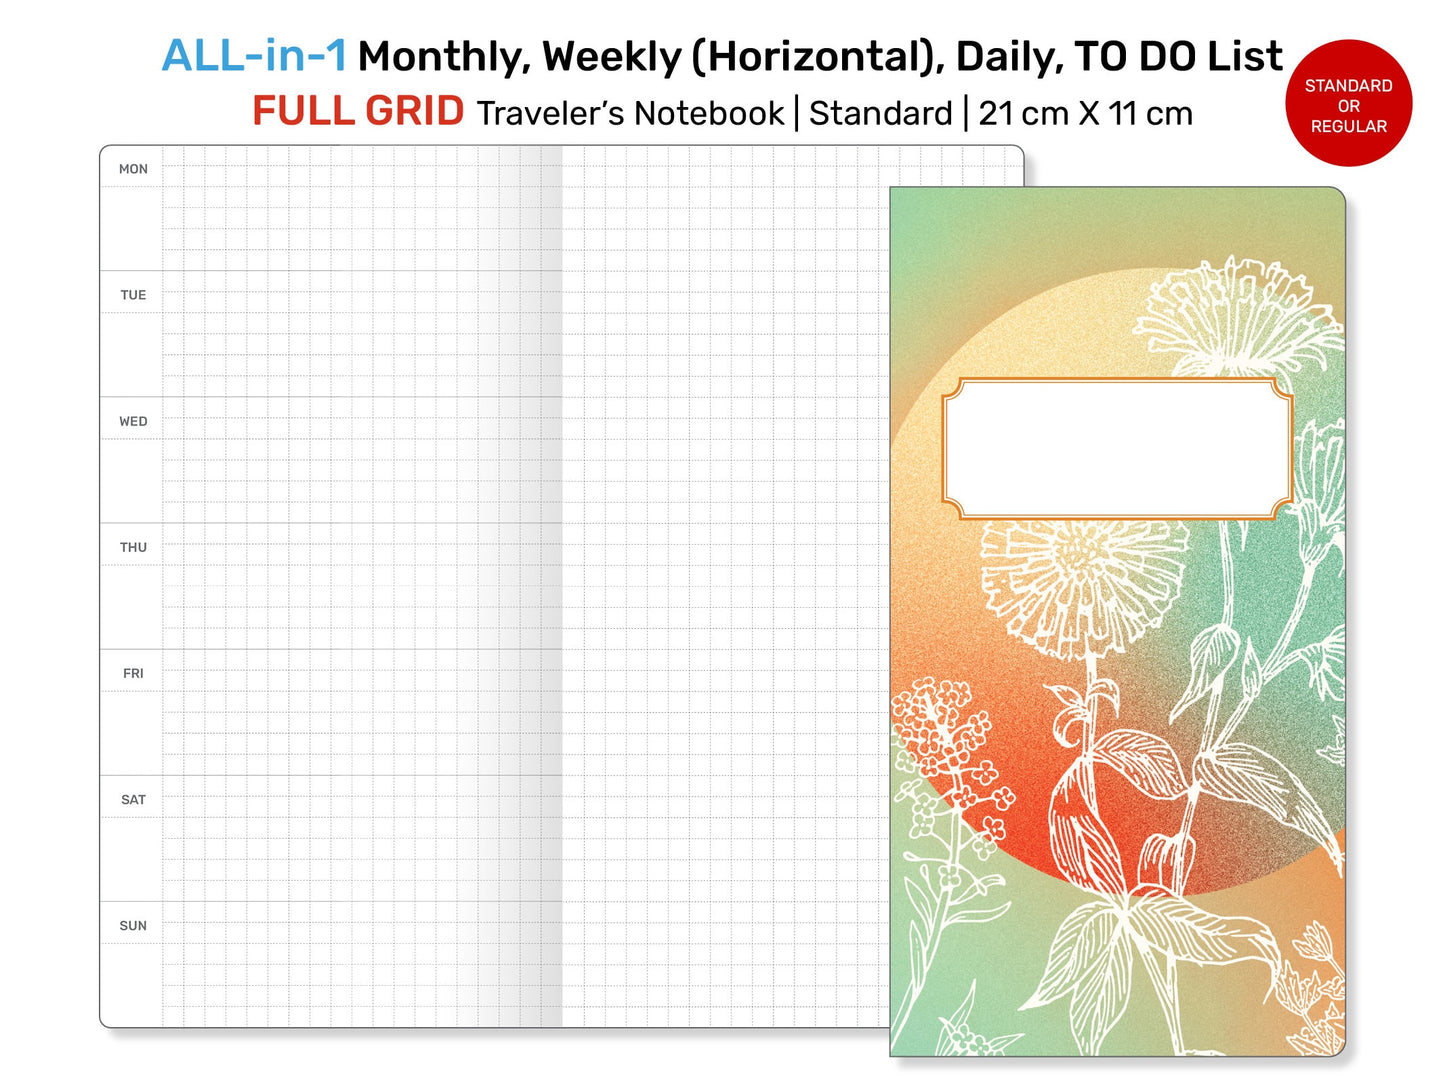 Standard TN ALL-in-1 Monthly, Weekly Horizontal, Daily, List Full GRID Printable Traveler's Notebook Insert